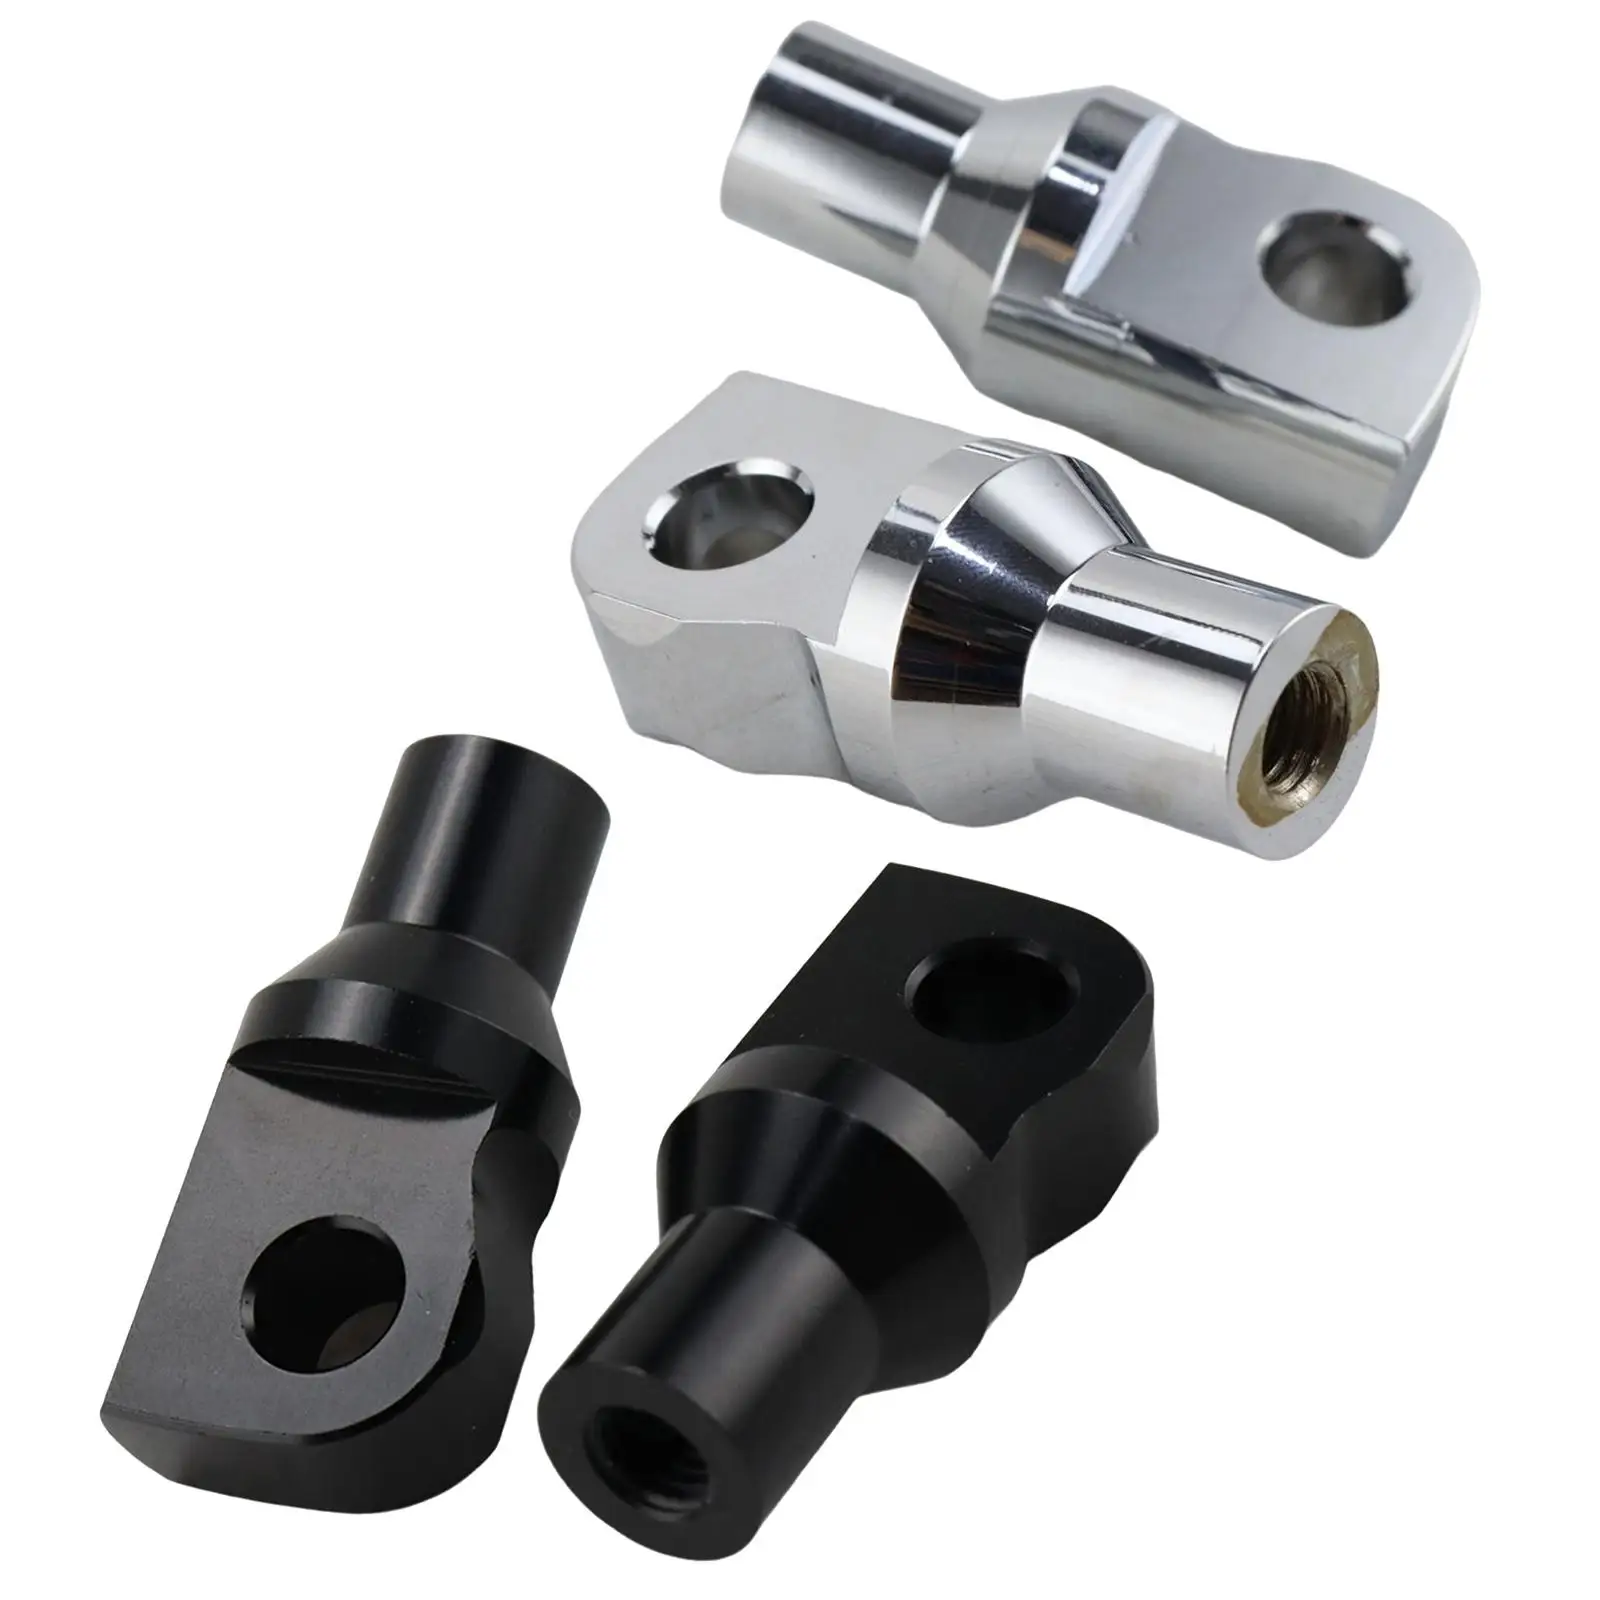 2 Pieces Foot Pegs Mounting Bolts Adapter for Male Pegs Mounting